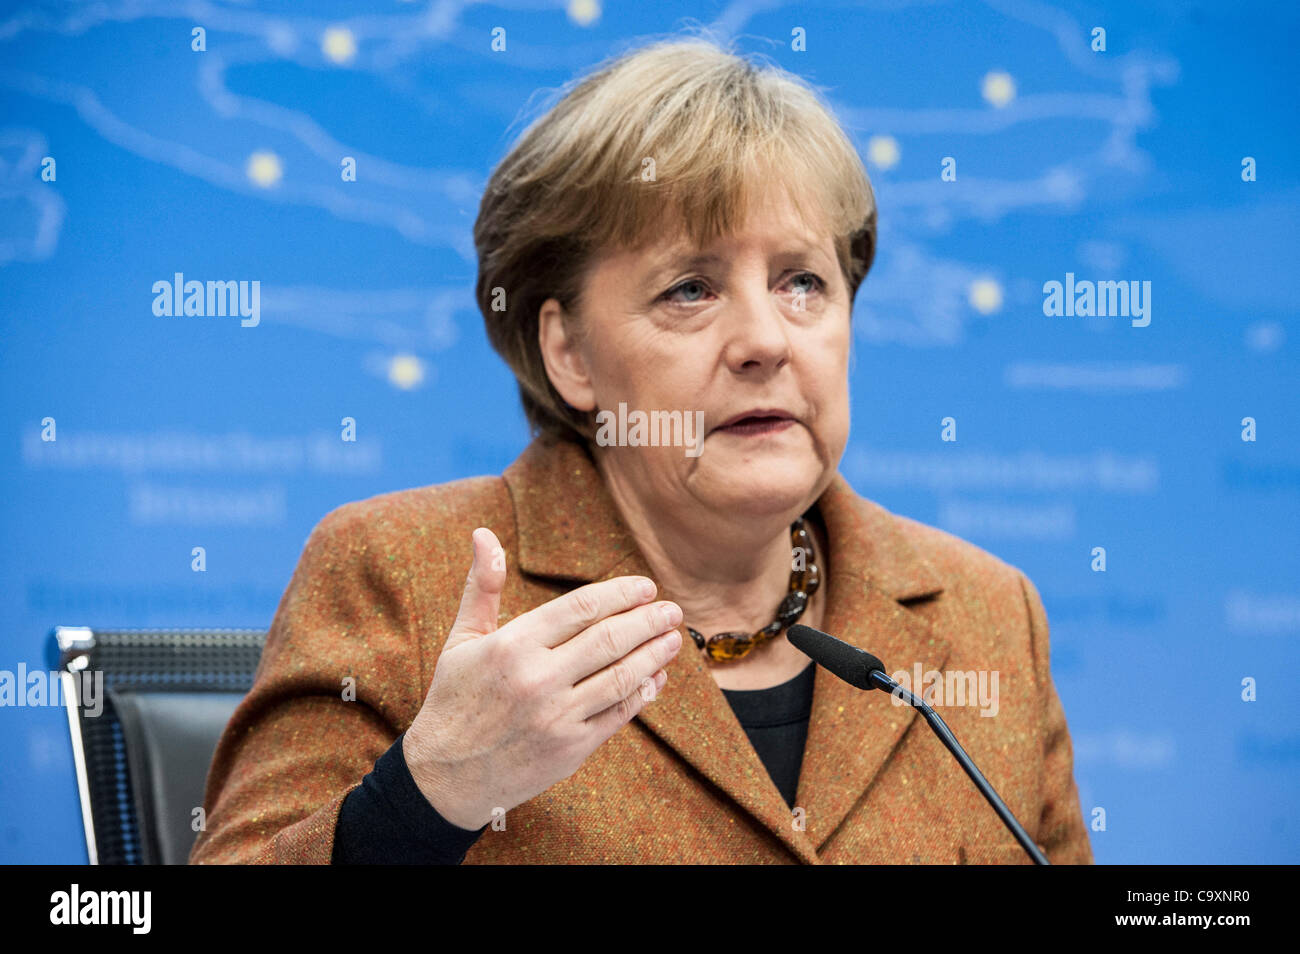 March 2, 2012 - Brussels, BXL, Belgium - Germany's Chancellor Angela Merkel   addresses a news conference at the end of a European Union leaders summit  in  Brussels, Belgium on 2012-03-02   by Wiktor Dabkowski (Credit Image: © Wiktor Dabkowski/ZUMAPRESS.com) Stock Photo